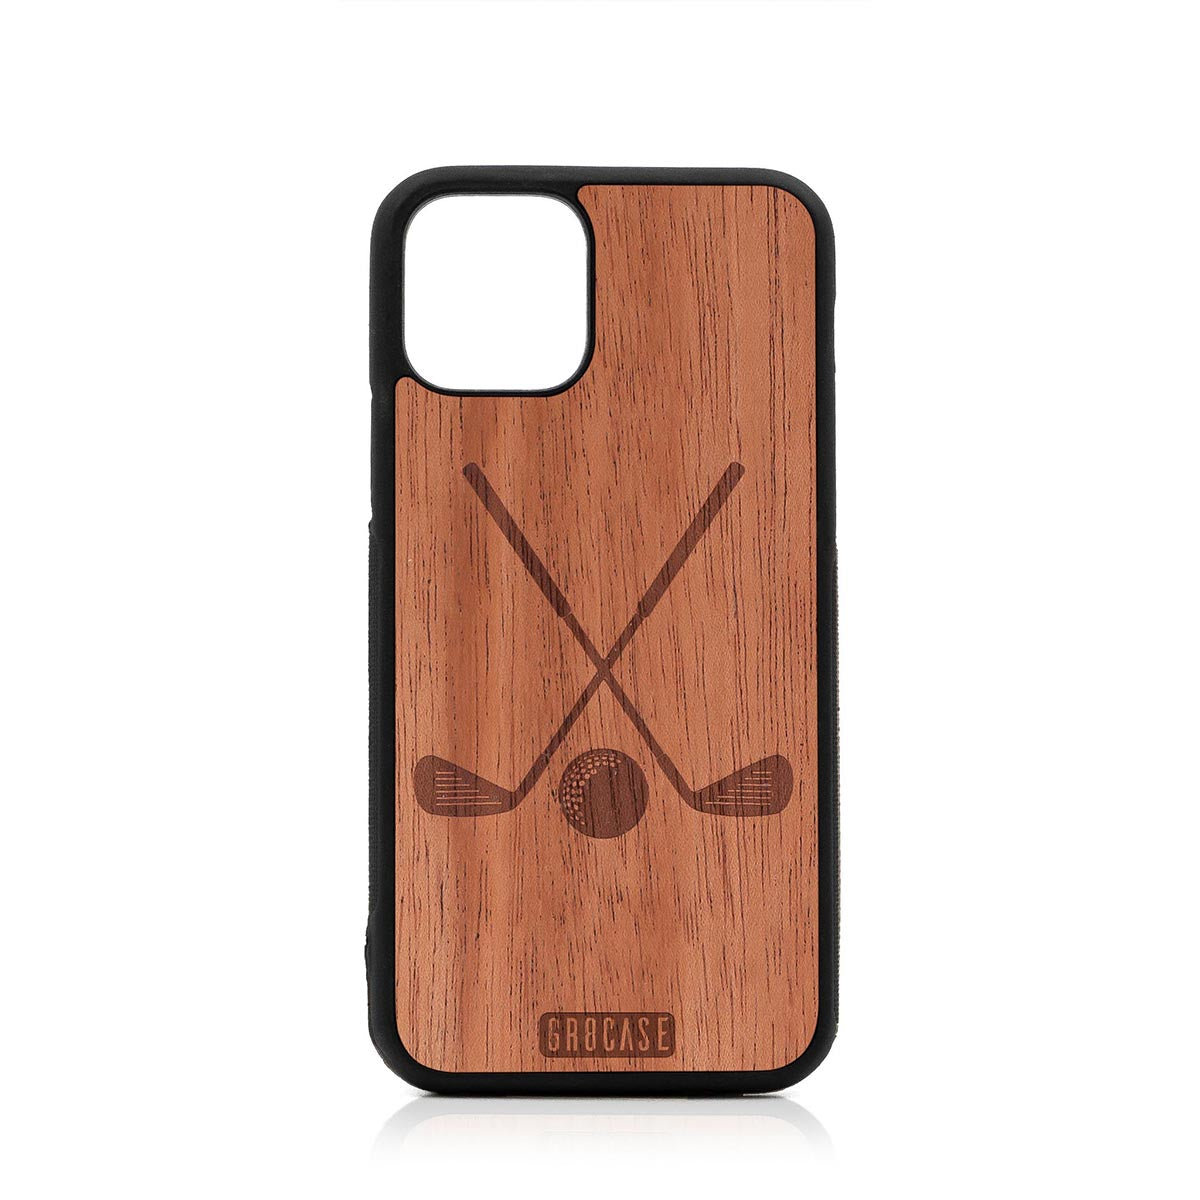 Golf Design Wood Case For iPhone 11 Pro by GR8CASE